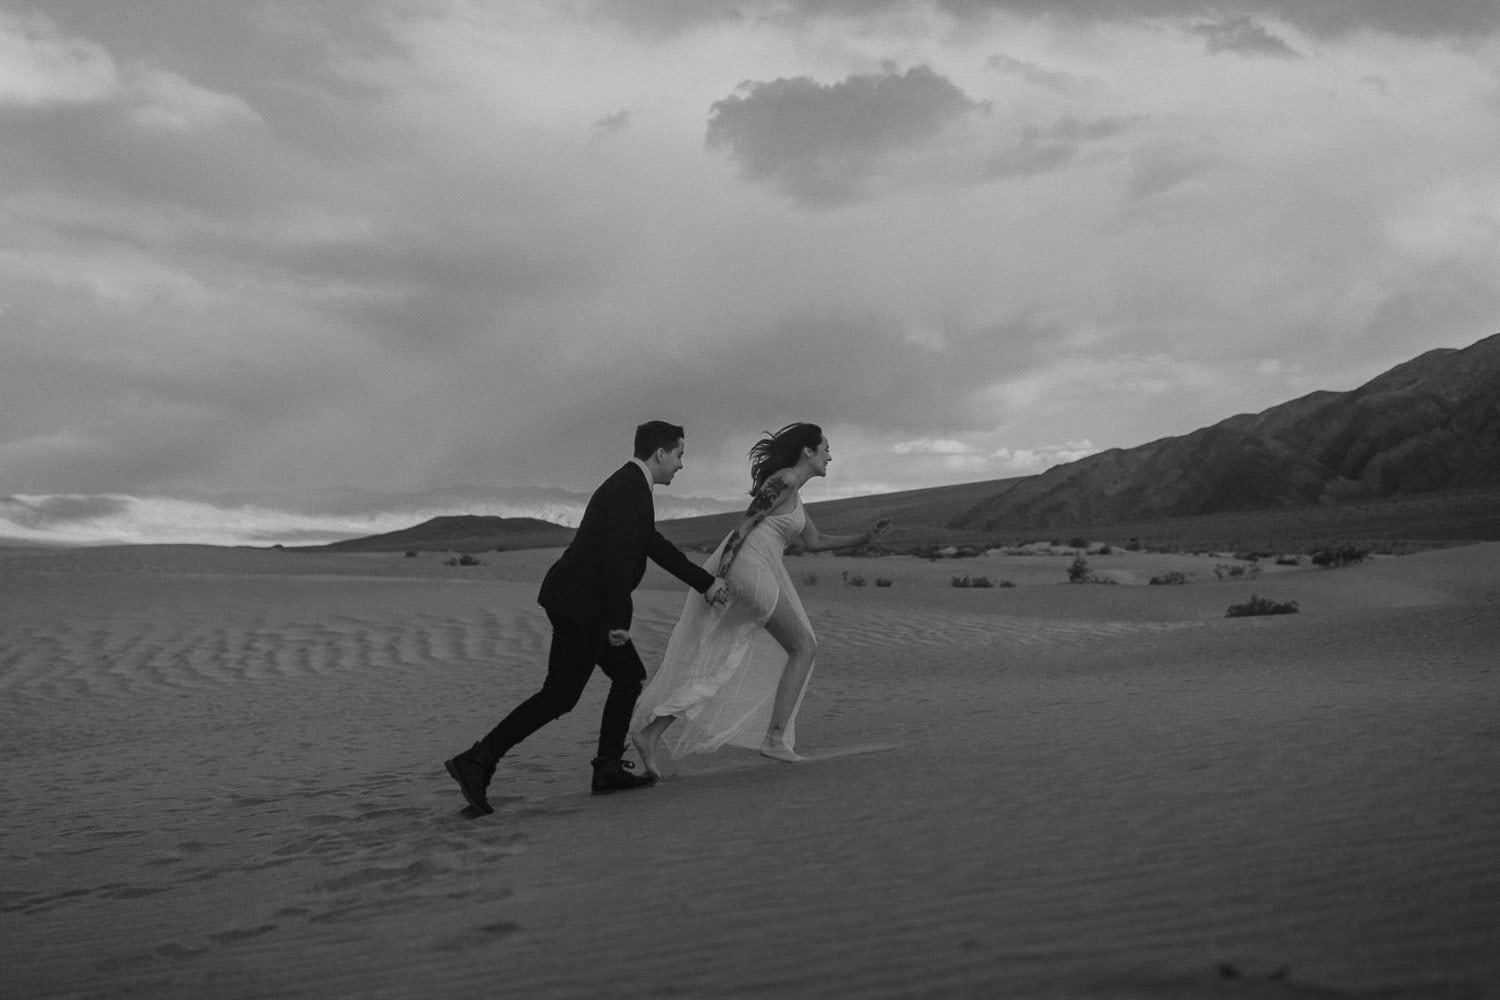 Amazing Oregon desert elopement in the sand dunes. The wedding couple runs up the sand dune in this black and white image. Her elopement dress flows out behind her.